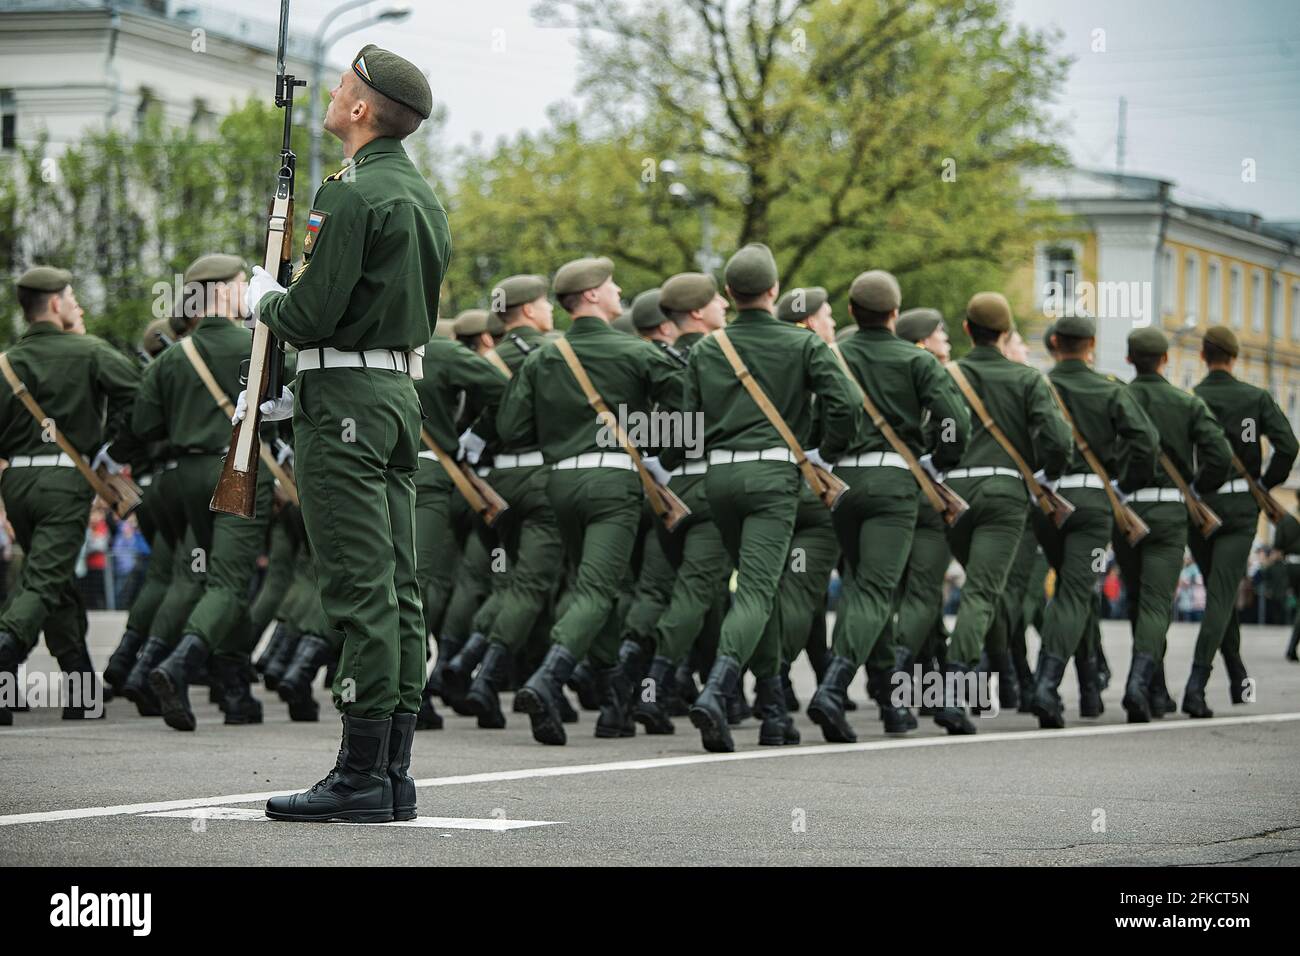 military holiday in city, parade of armed forces of country a solemn March through streets of city, soldiers in uniform clearly stamping step in colum Stock Photo